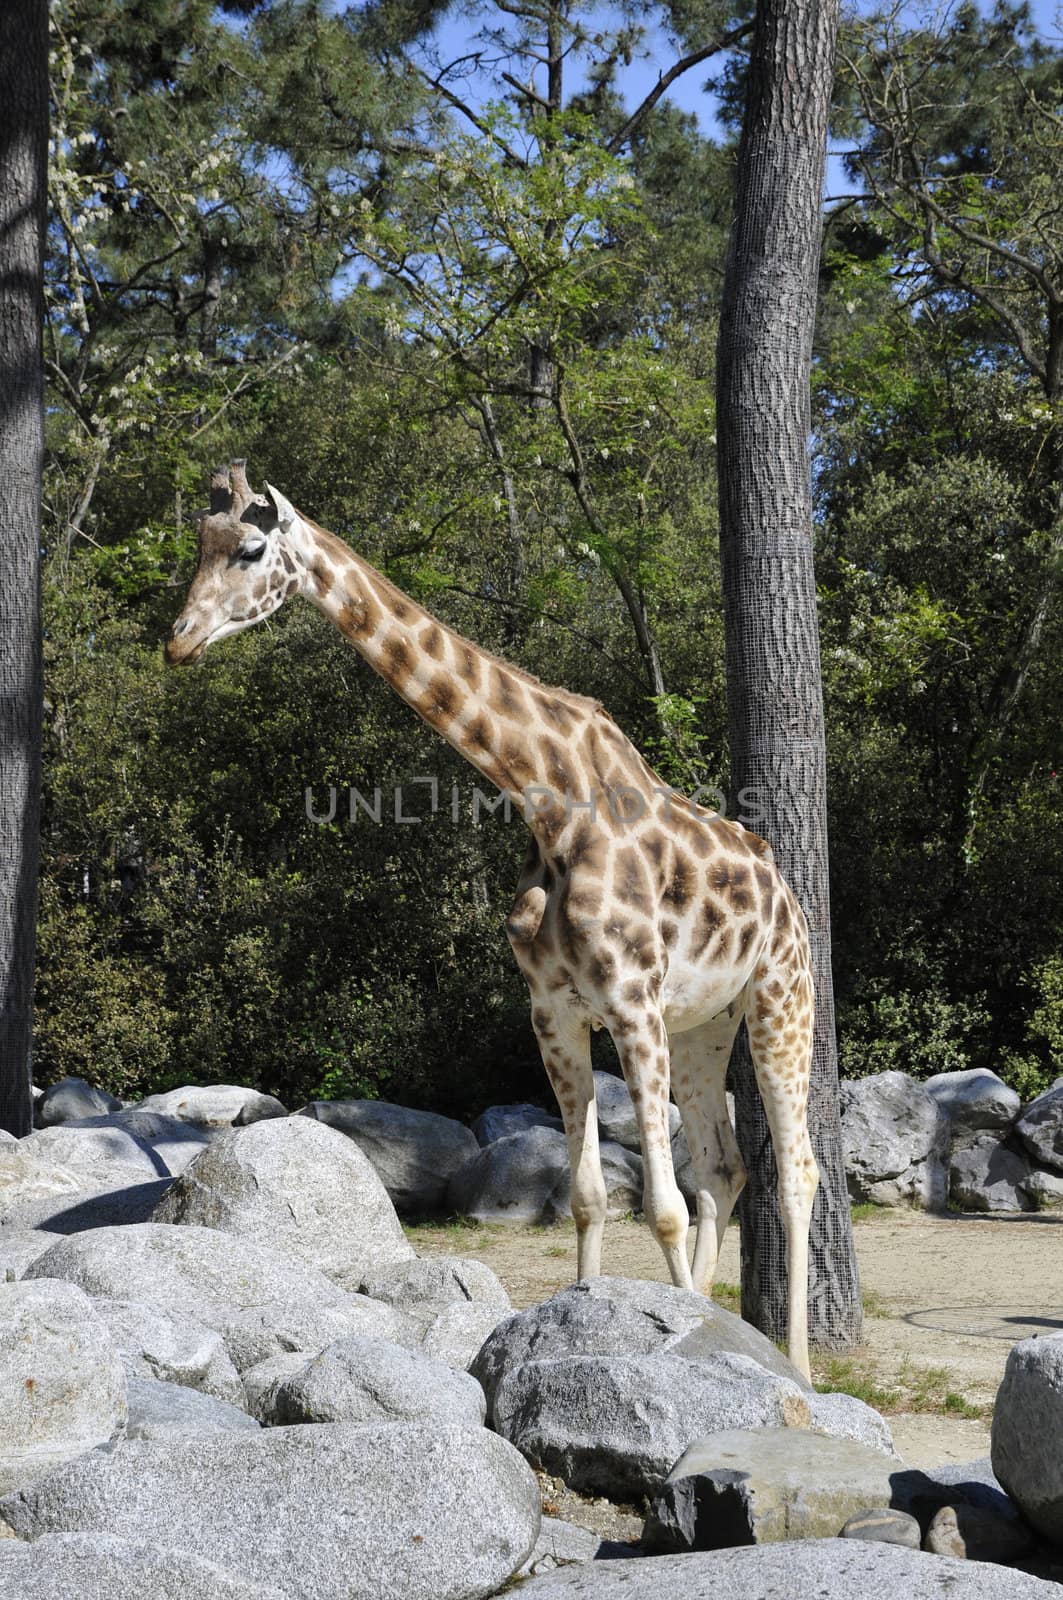 Giraffe in a Zoo Enclosure with rocks by shkyo30